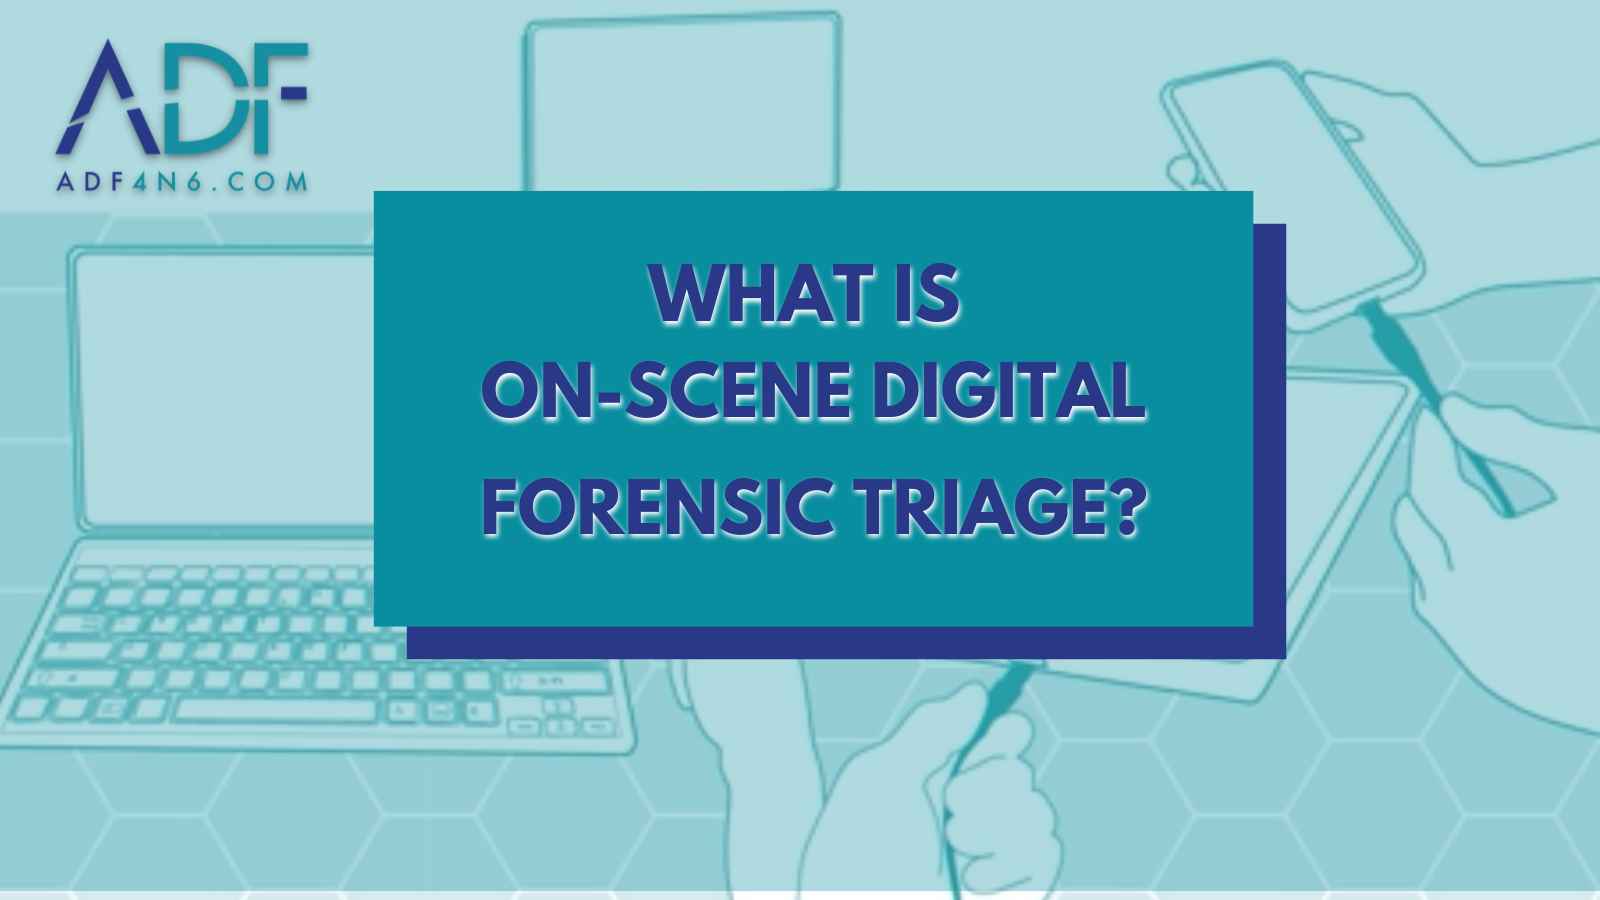 What is On-Scene Digital Forensic Triage?